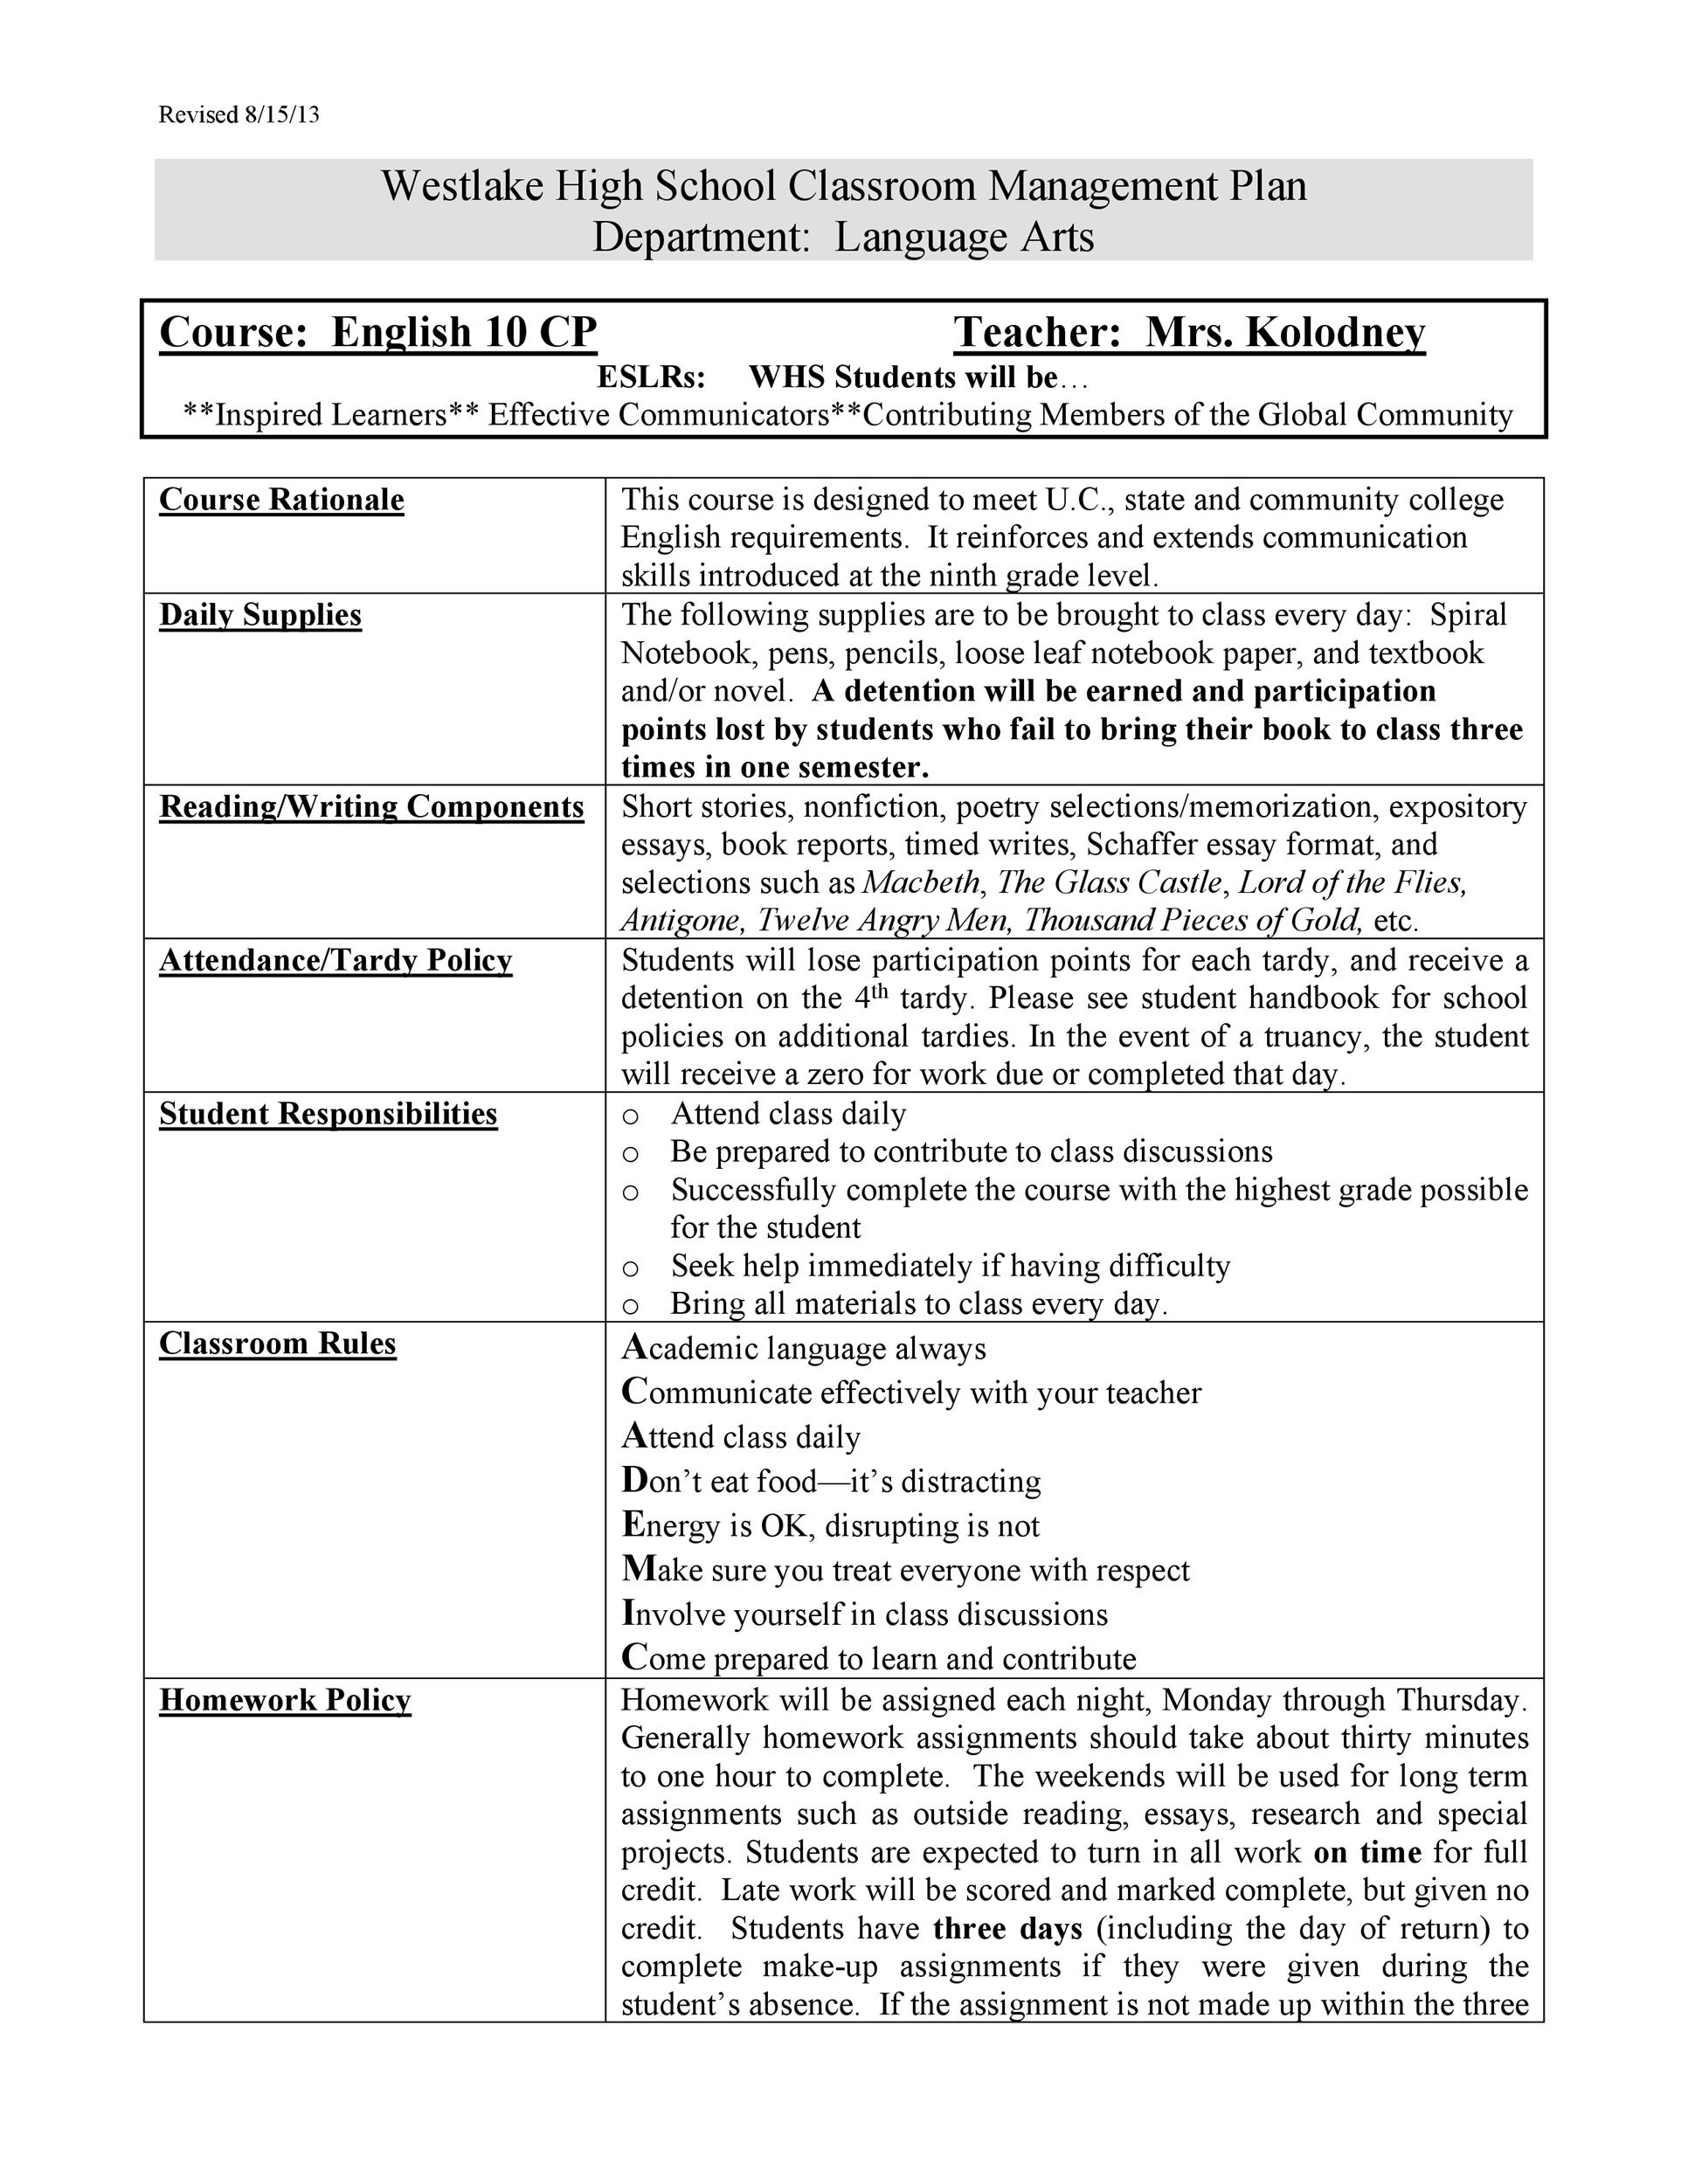 Classroom Management Plan 38 Templates And Examples ᐅ Templatelab